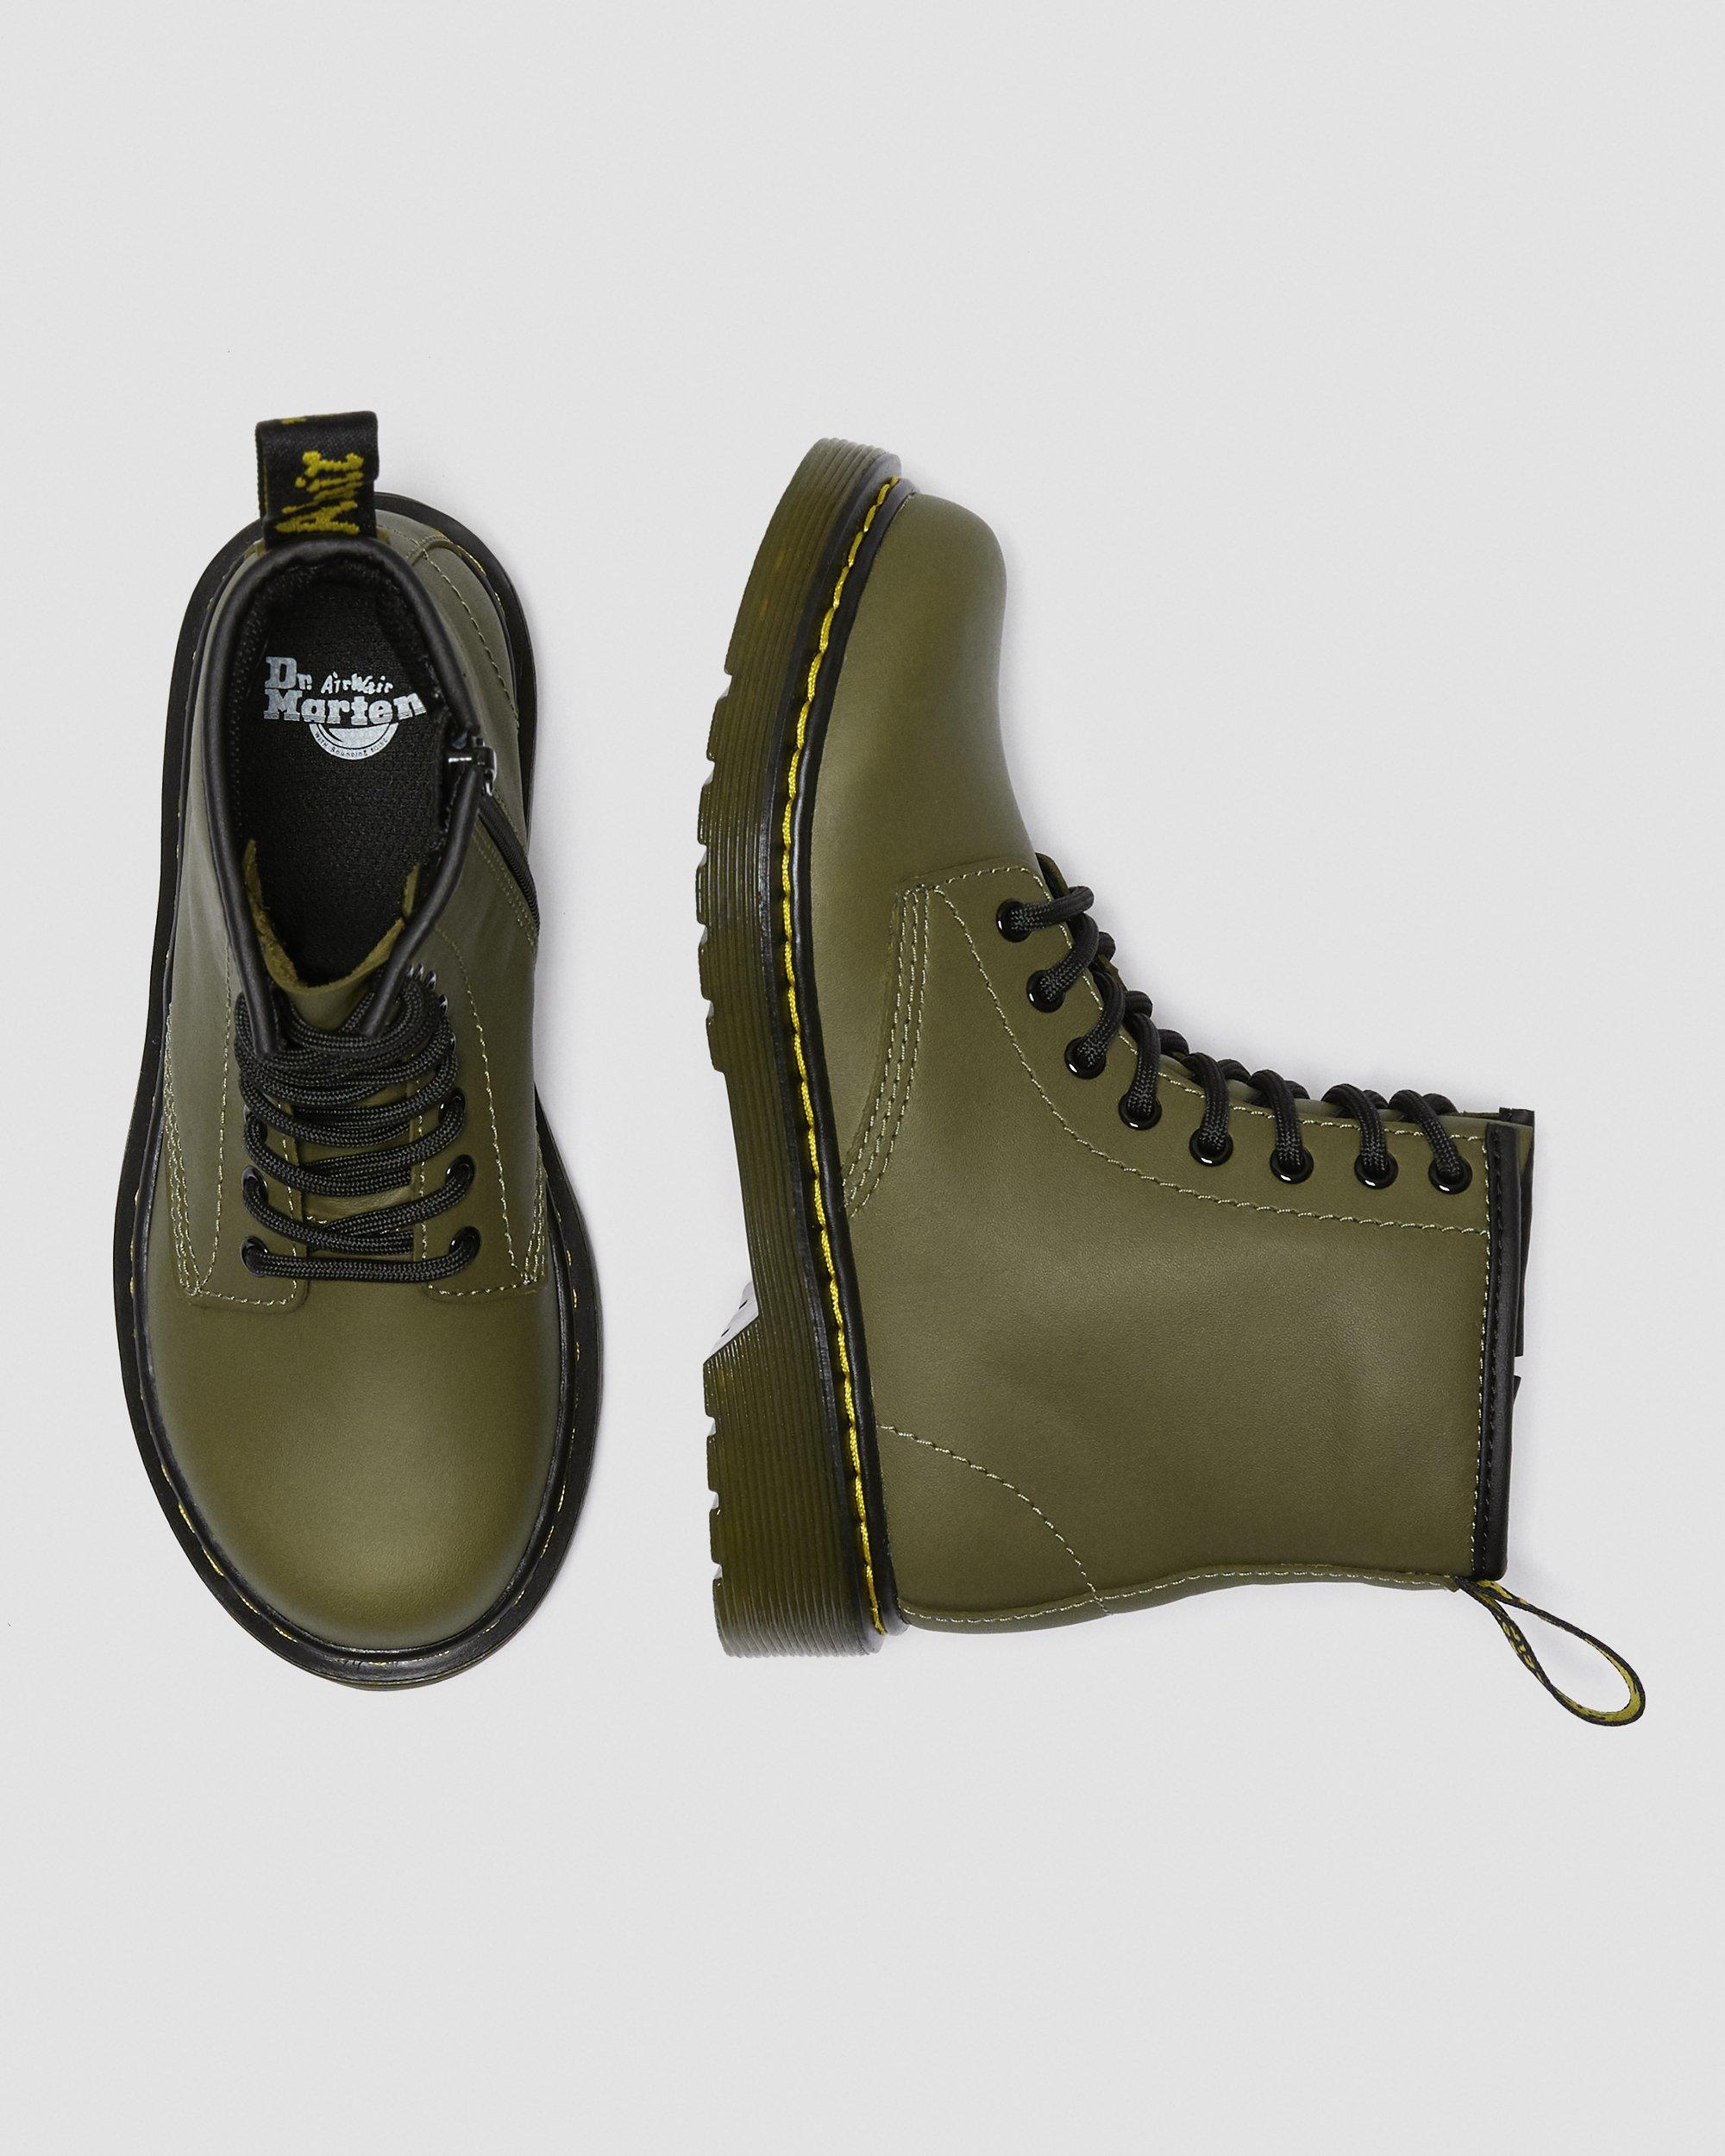 Lace Leather Dr. Olive | in Boots 1460 Martens Up Junior